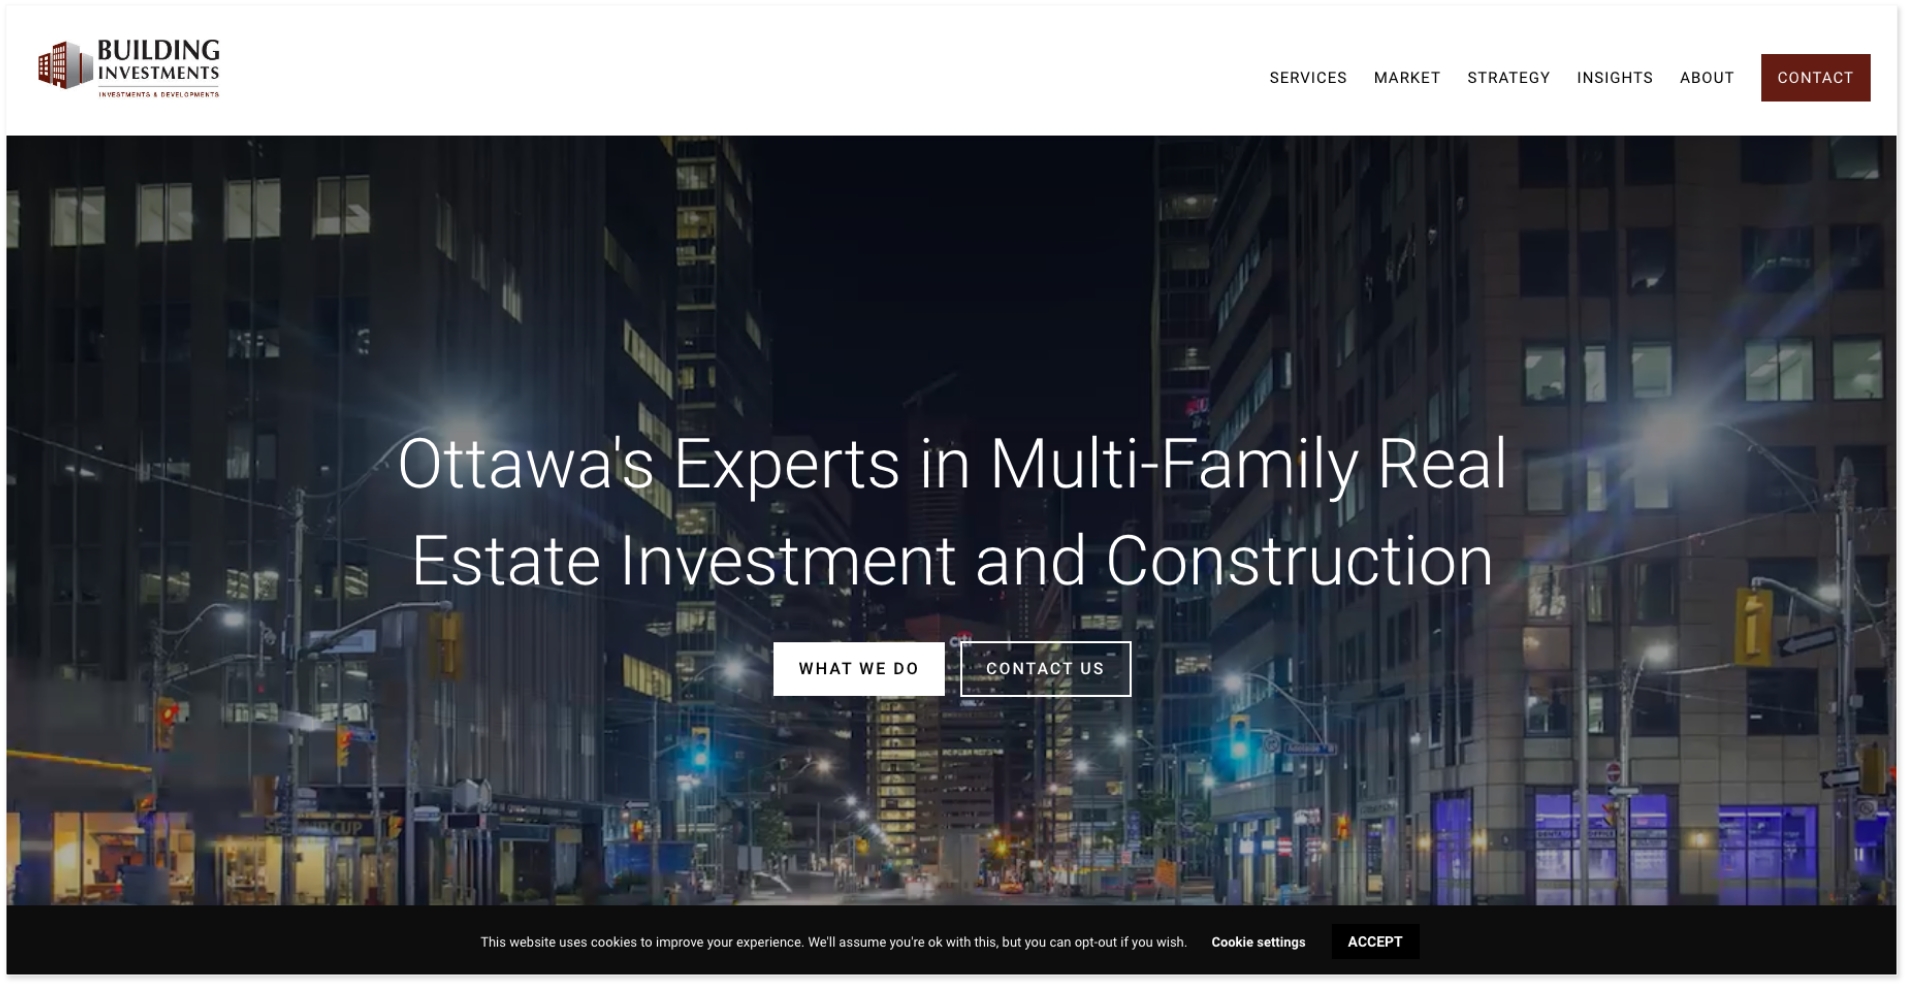 Website mockup designed by Nioma for an Ottawa real estate investment firm